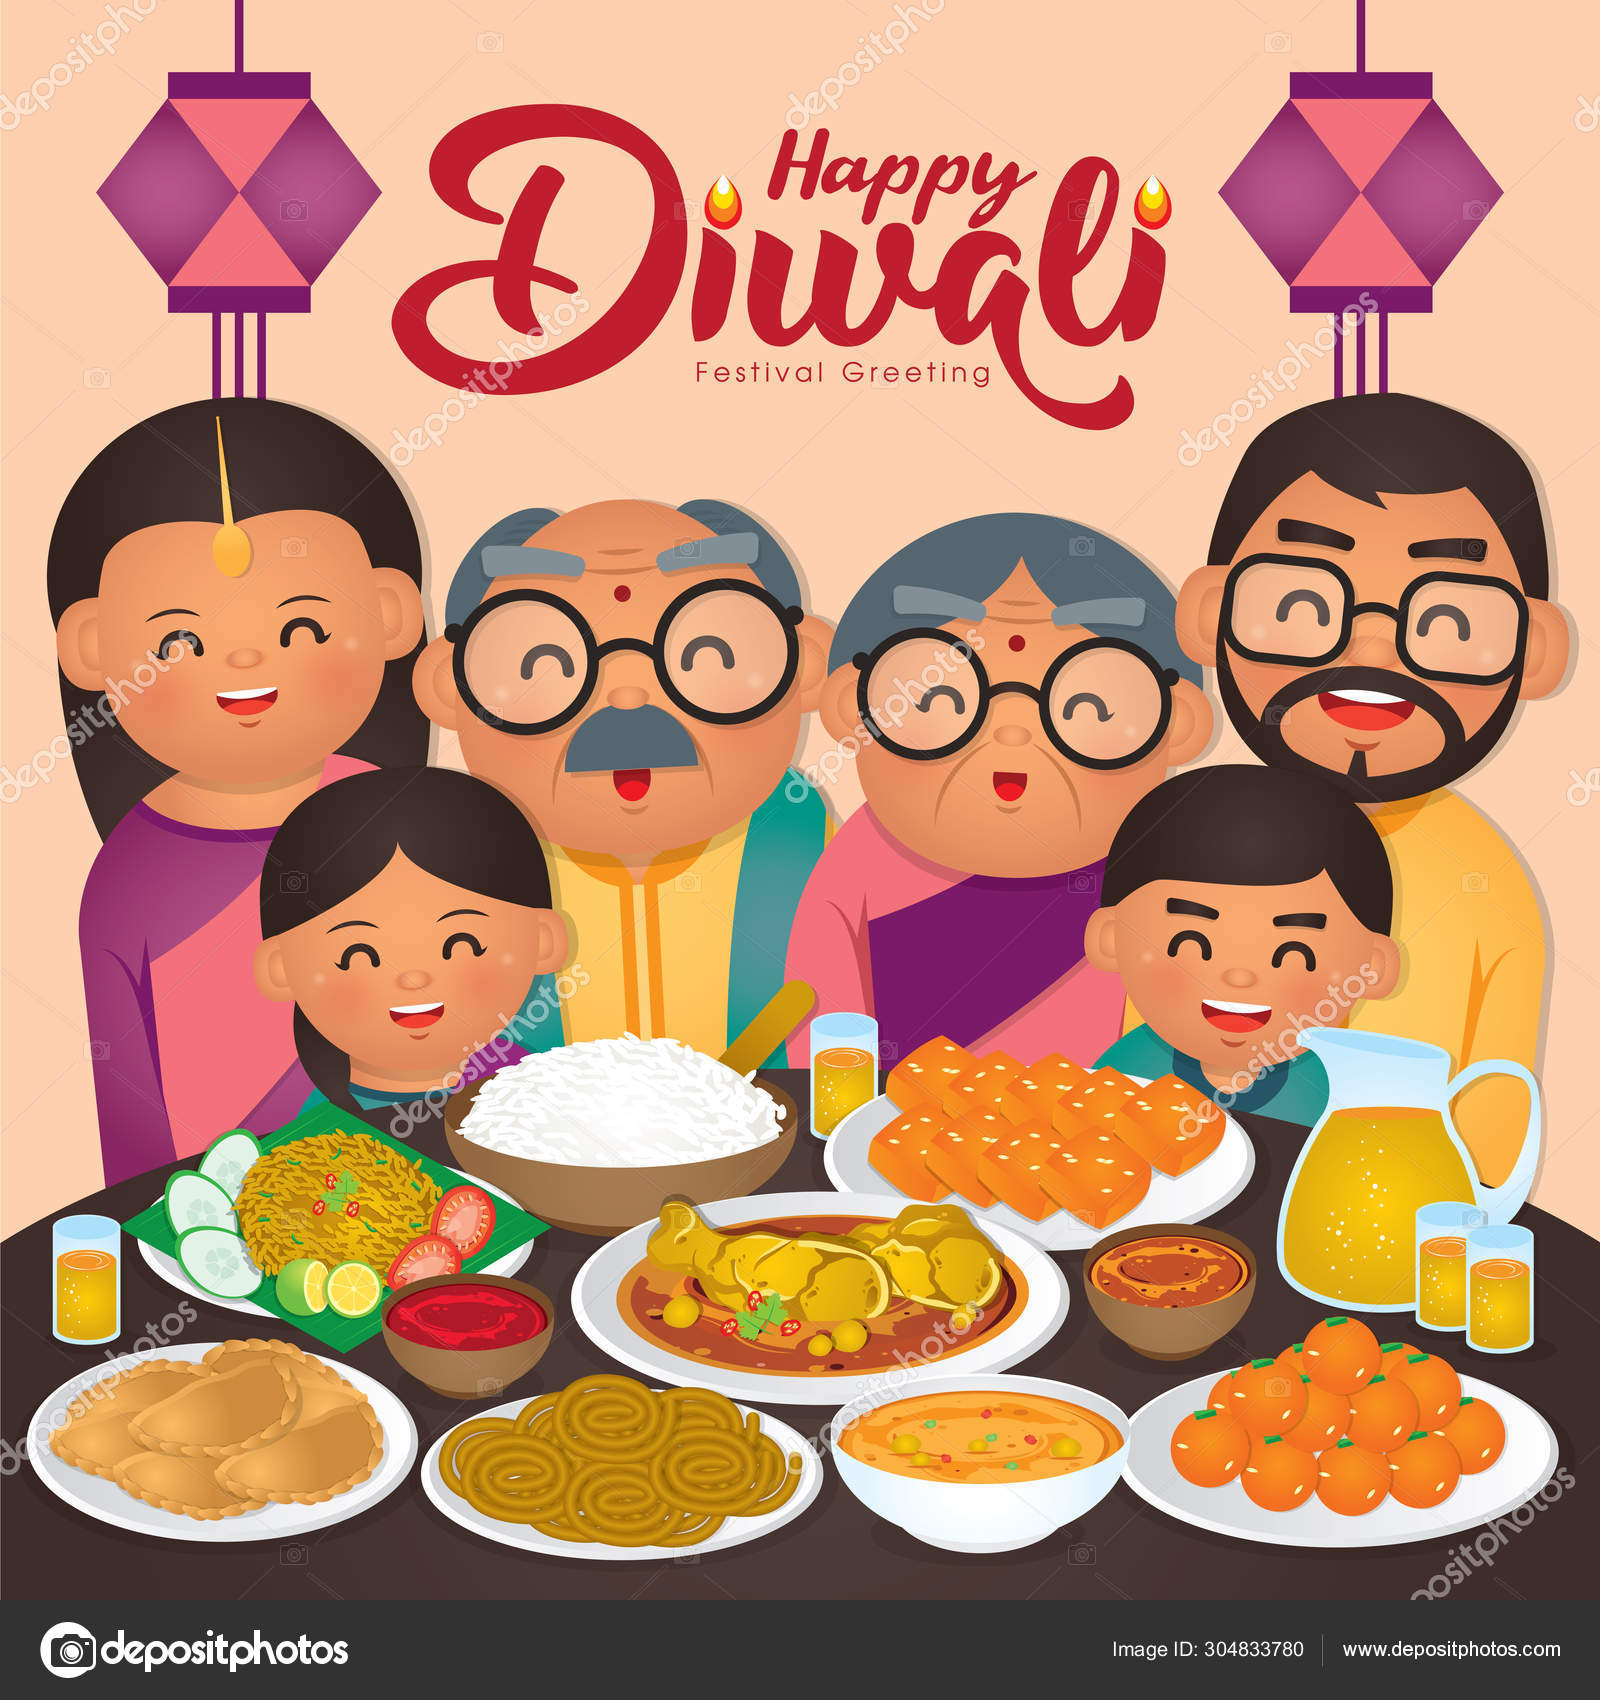 Diwali with child Vector Art Stock Images | Depositphotos